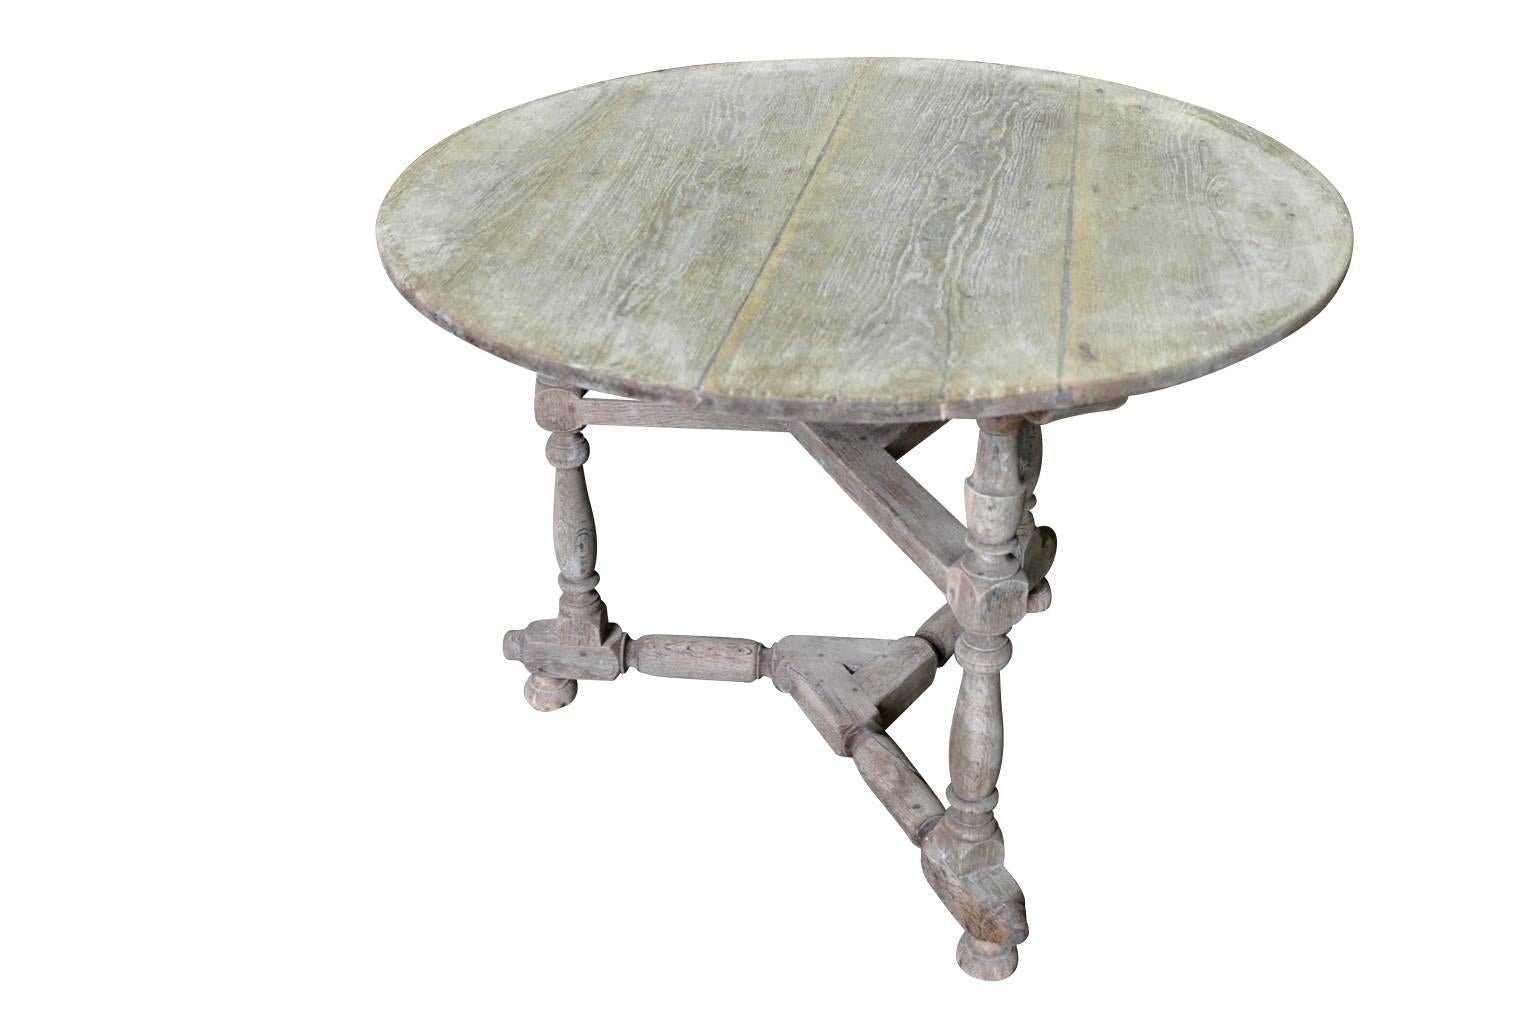 A very charming French later 19th century gueridon - table base in washed chestnut. A wonderful occasional table for any primitive interior of porch.